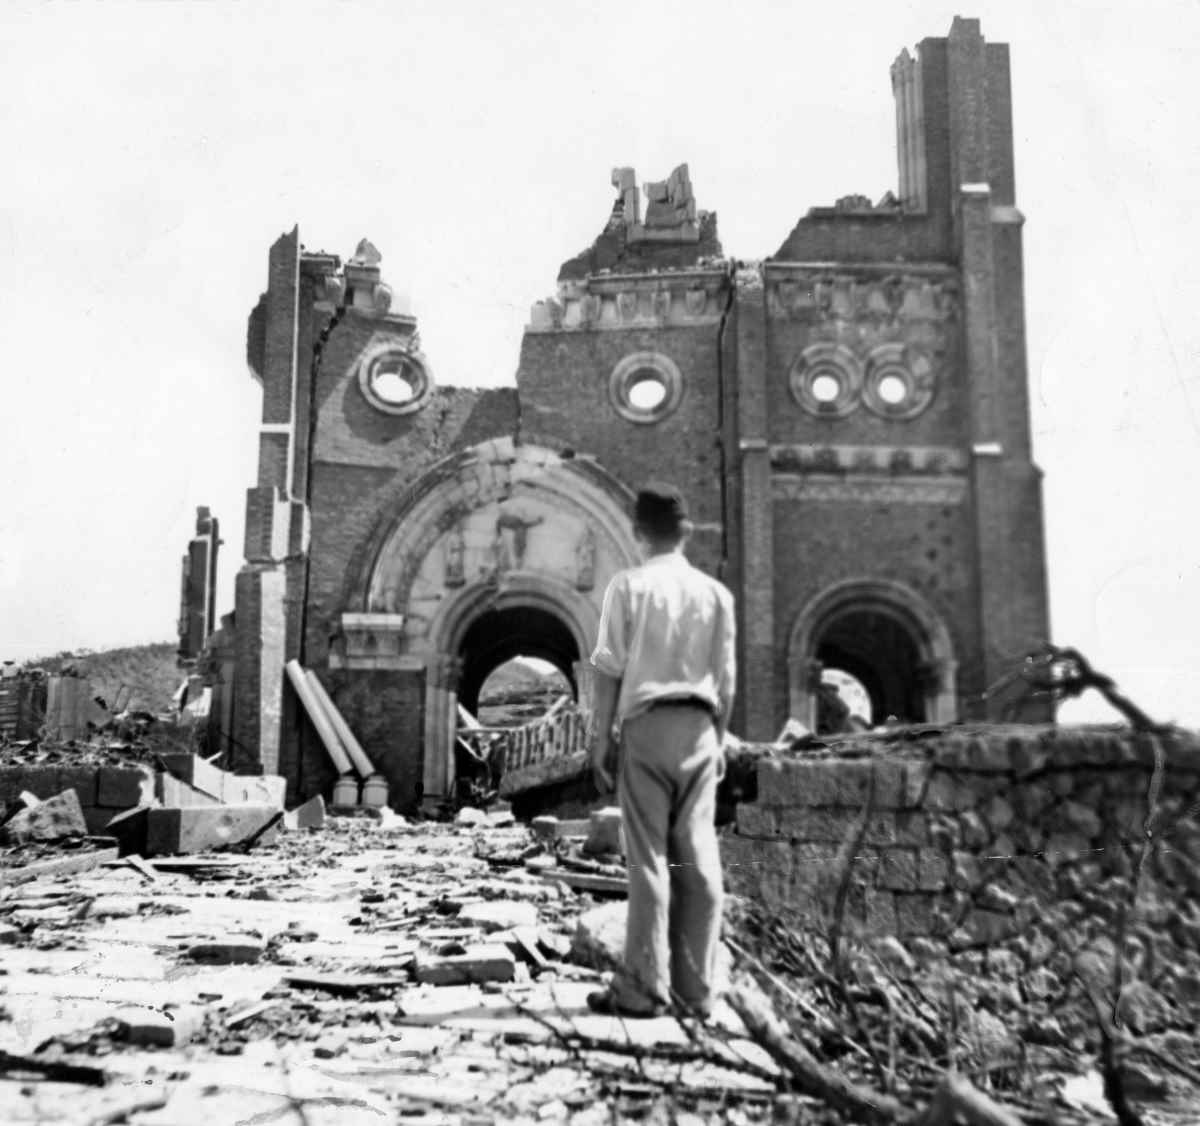 A man stands in front of Urakami Cathedral, which was left in ruins after the bombing, in a photo taken in September 1945. (ACME)